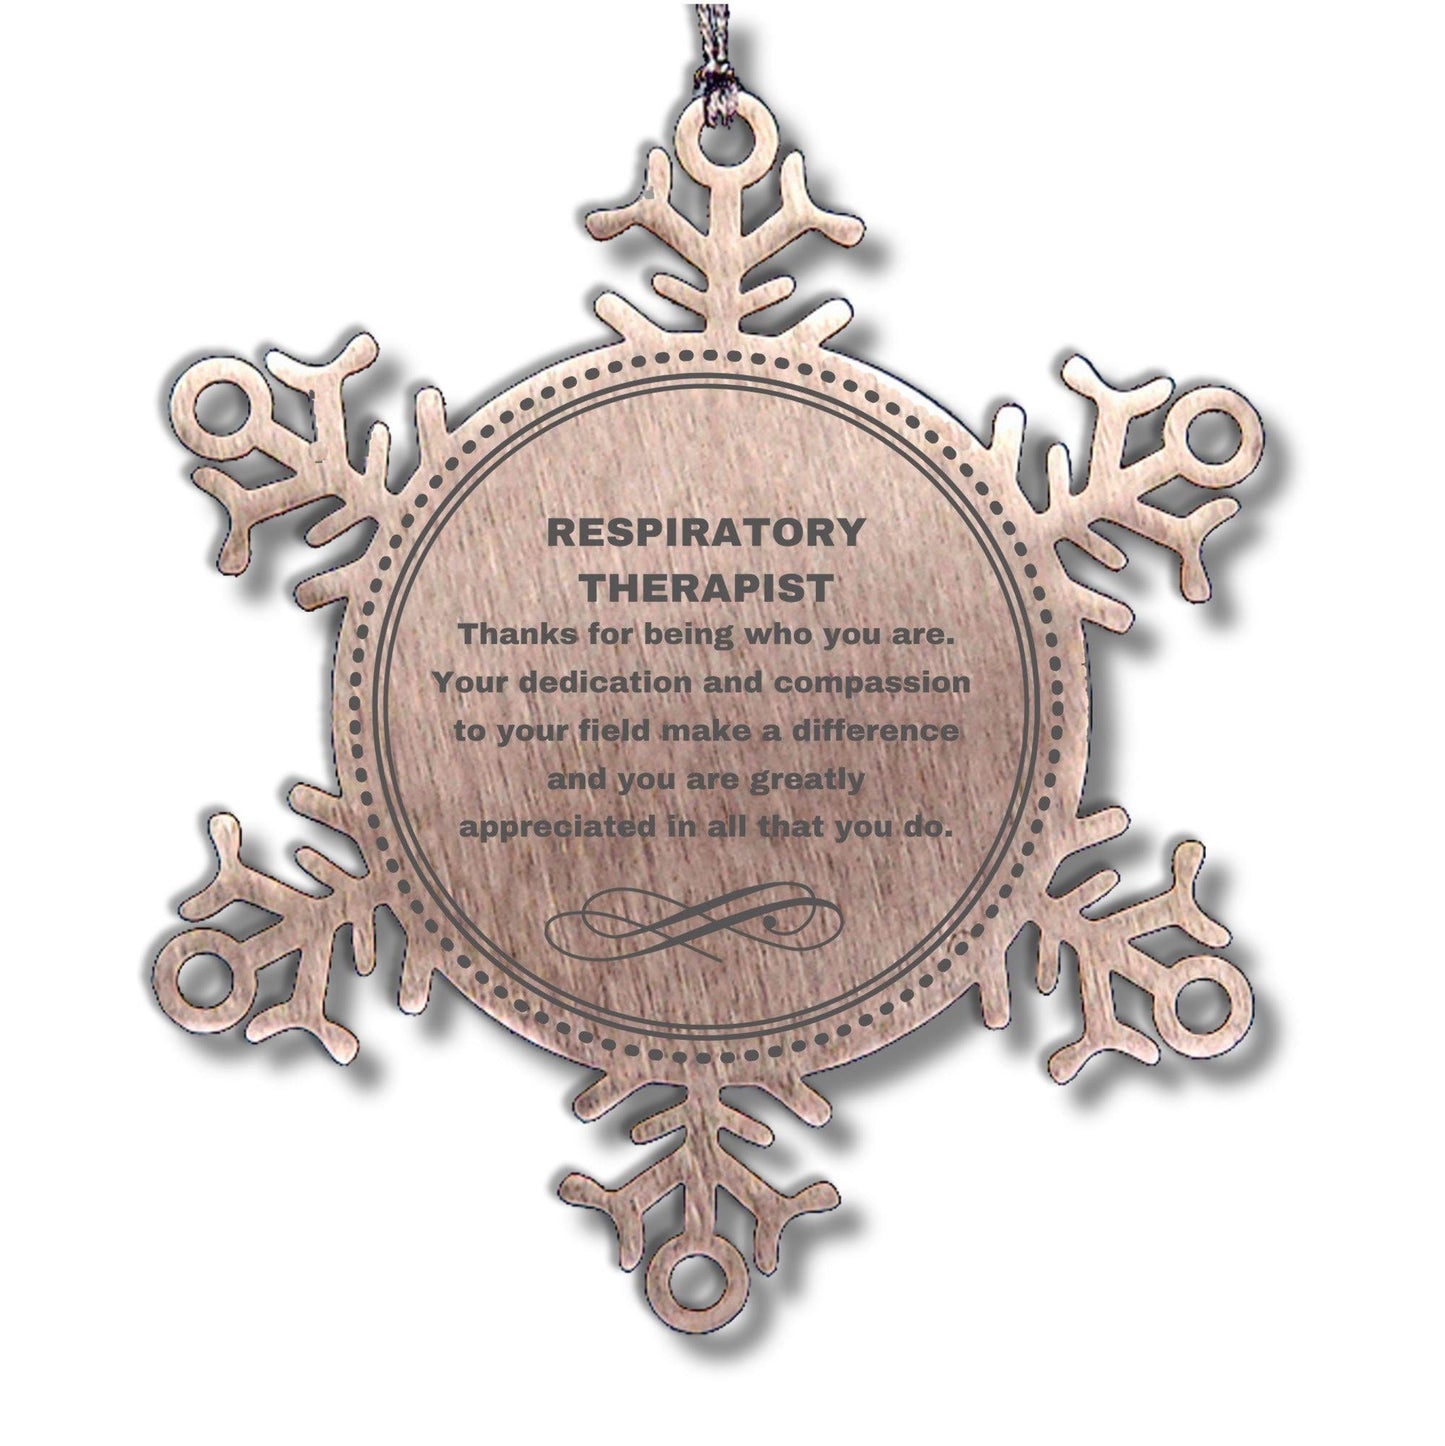 Respiratory Therapist Snowflake Ornament - Thanks for being who you are - Birthday Christmas Jewelry Gifts Coworkers Colleague Boss - Mallard Moon Gift Shop